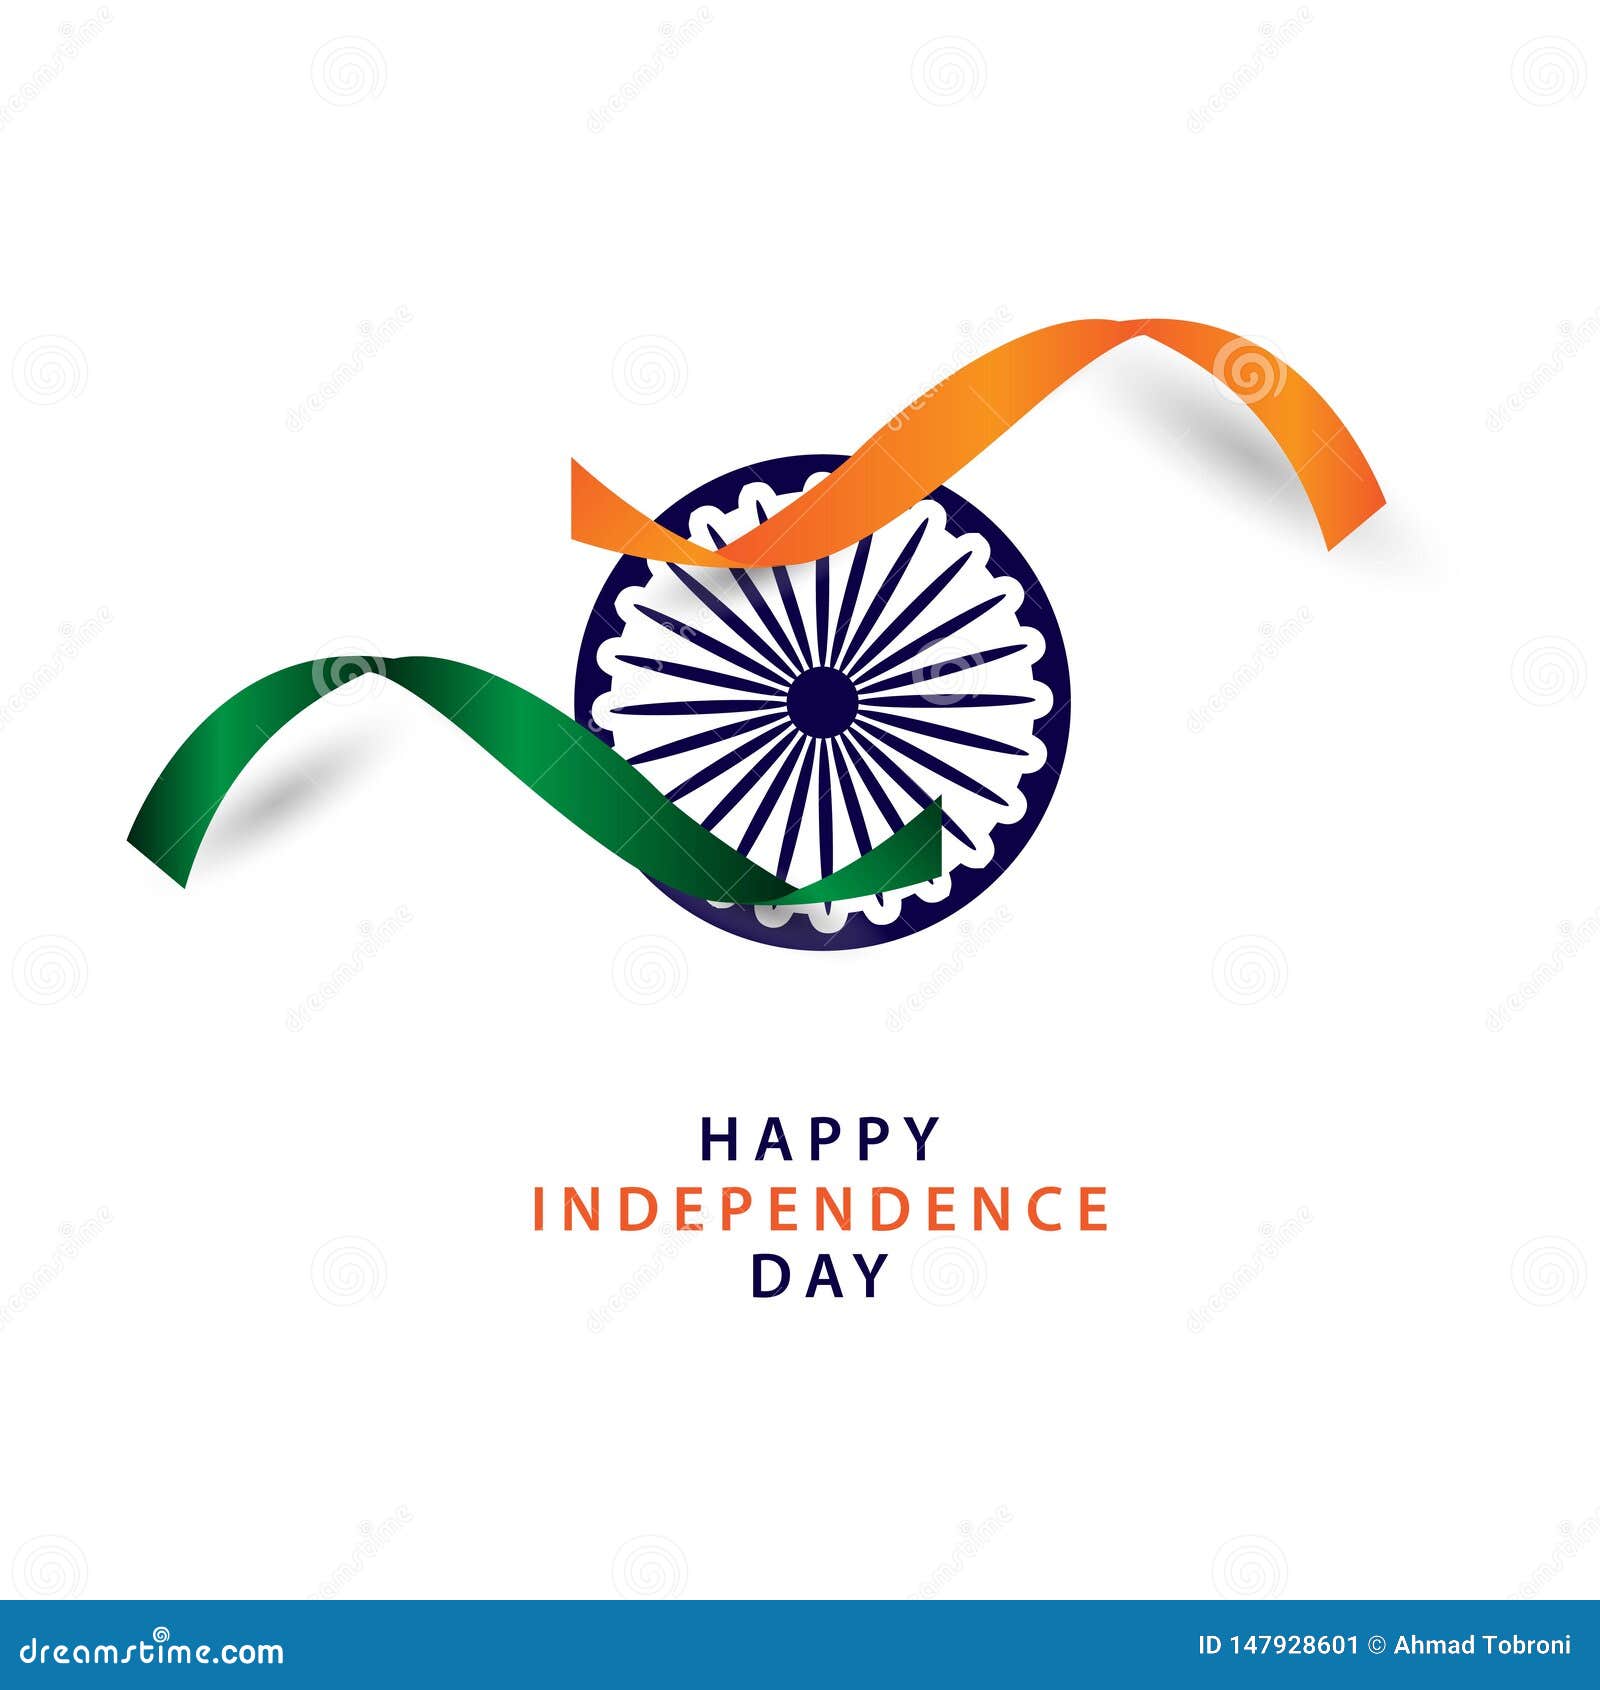 Independence Day ClipArt India